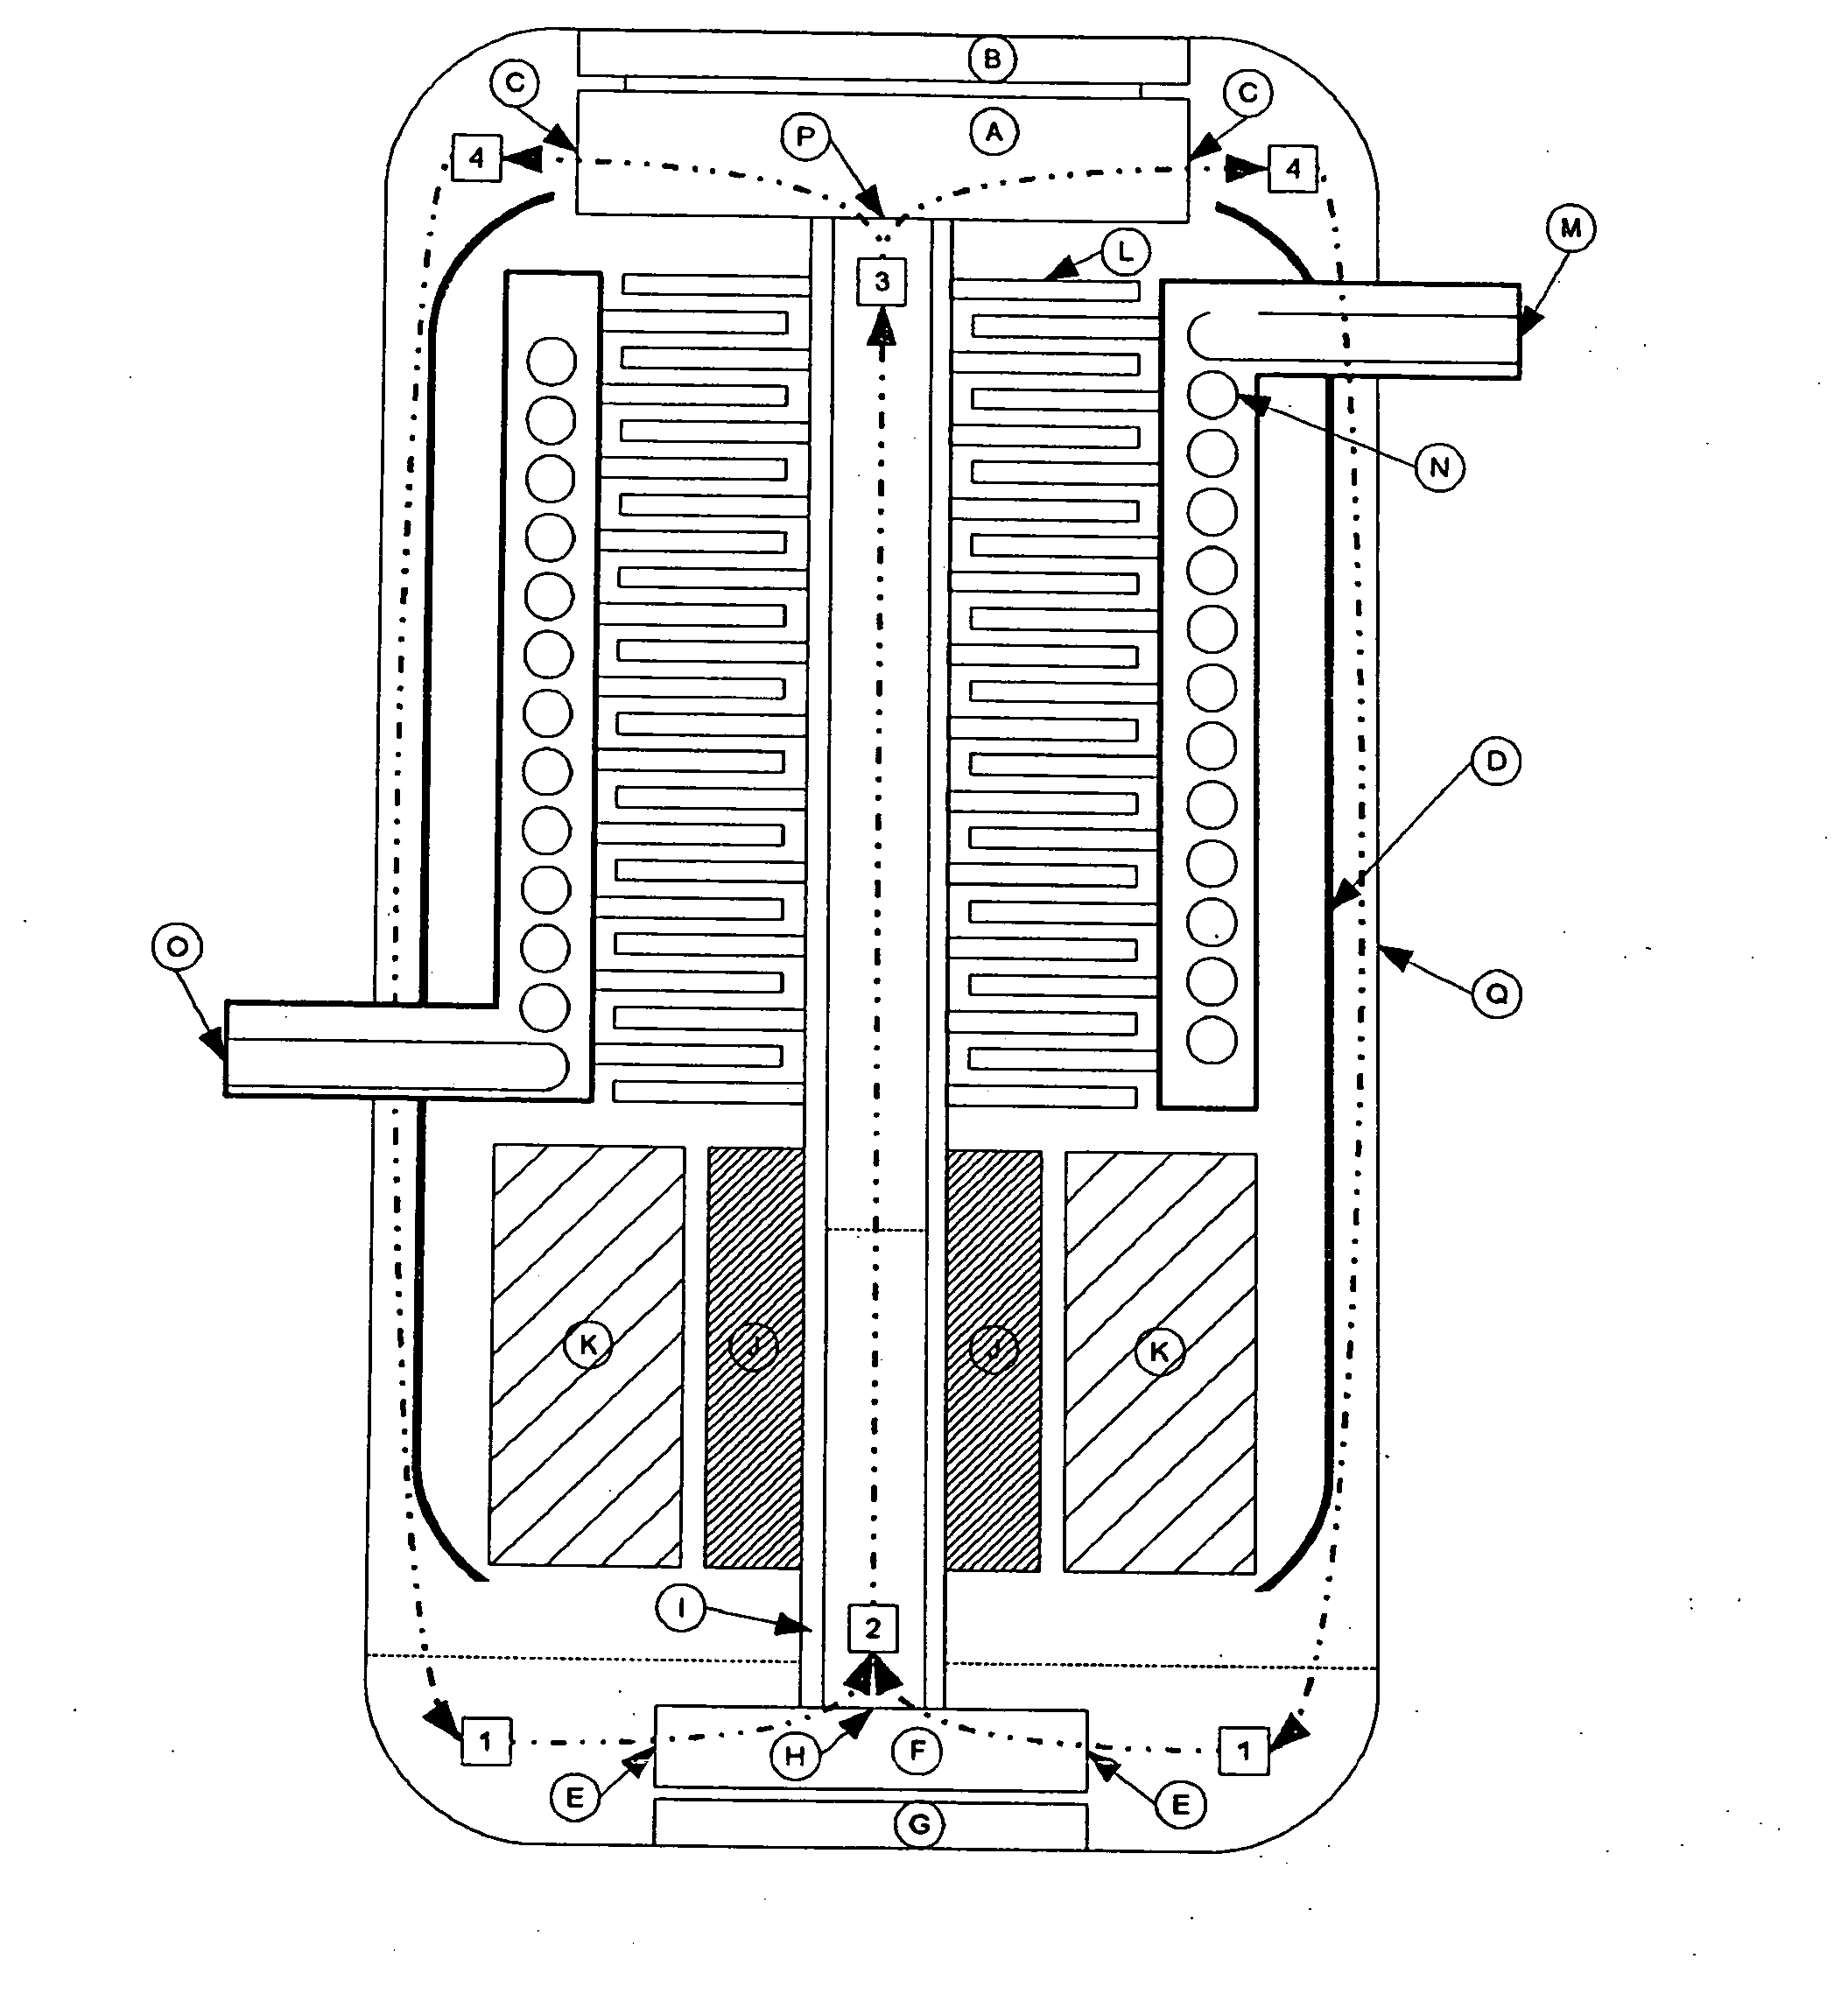 Compact Energy Cycle Construction Utilizing Some Combination of a Scroll Type Expander, Pump, and Compressor for Operating According to a Rankine, an Organic Rankine, Heat Pump, or Combined Orgainc Rankine and Heat Pump Cycle